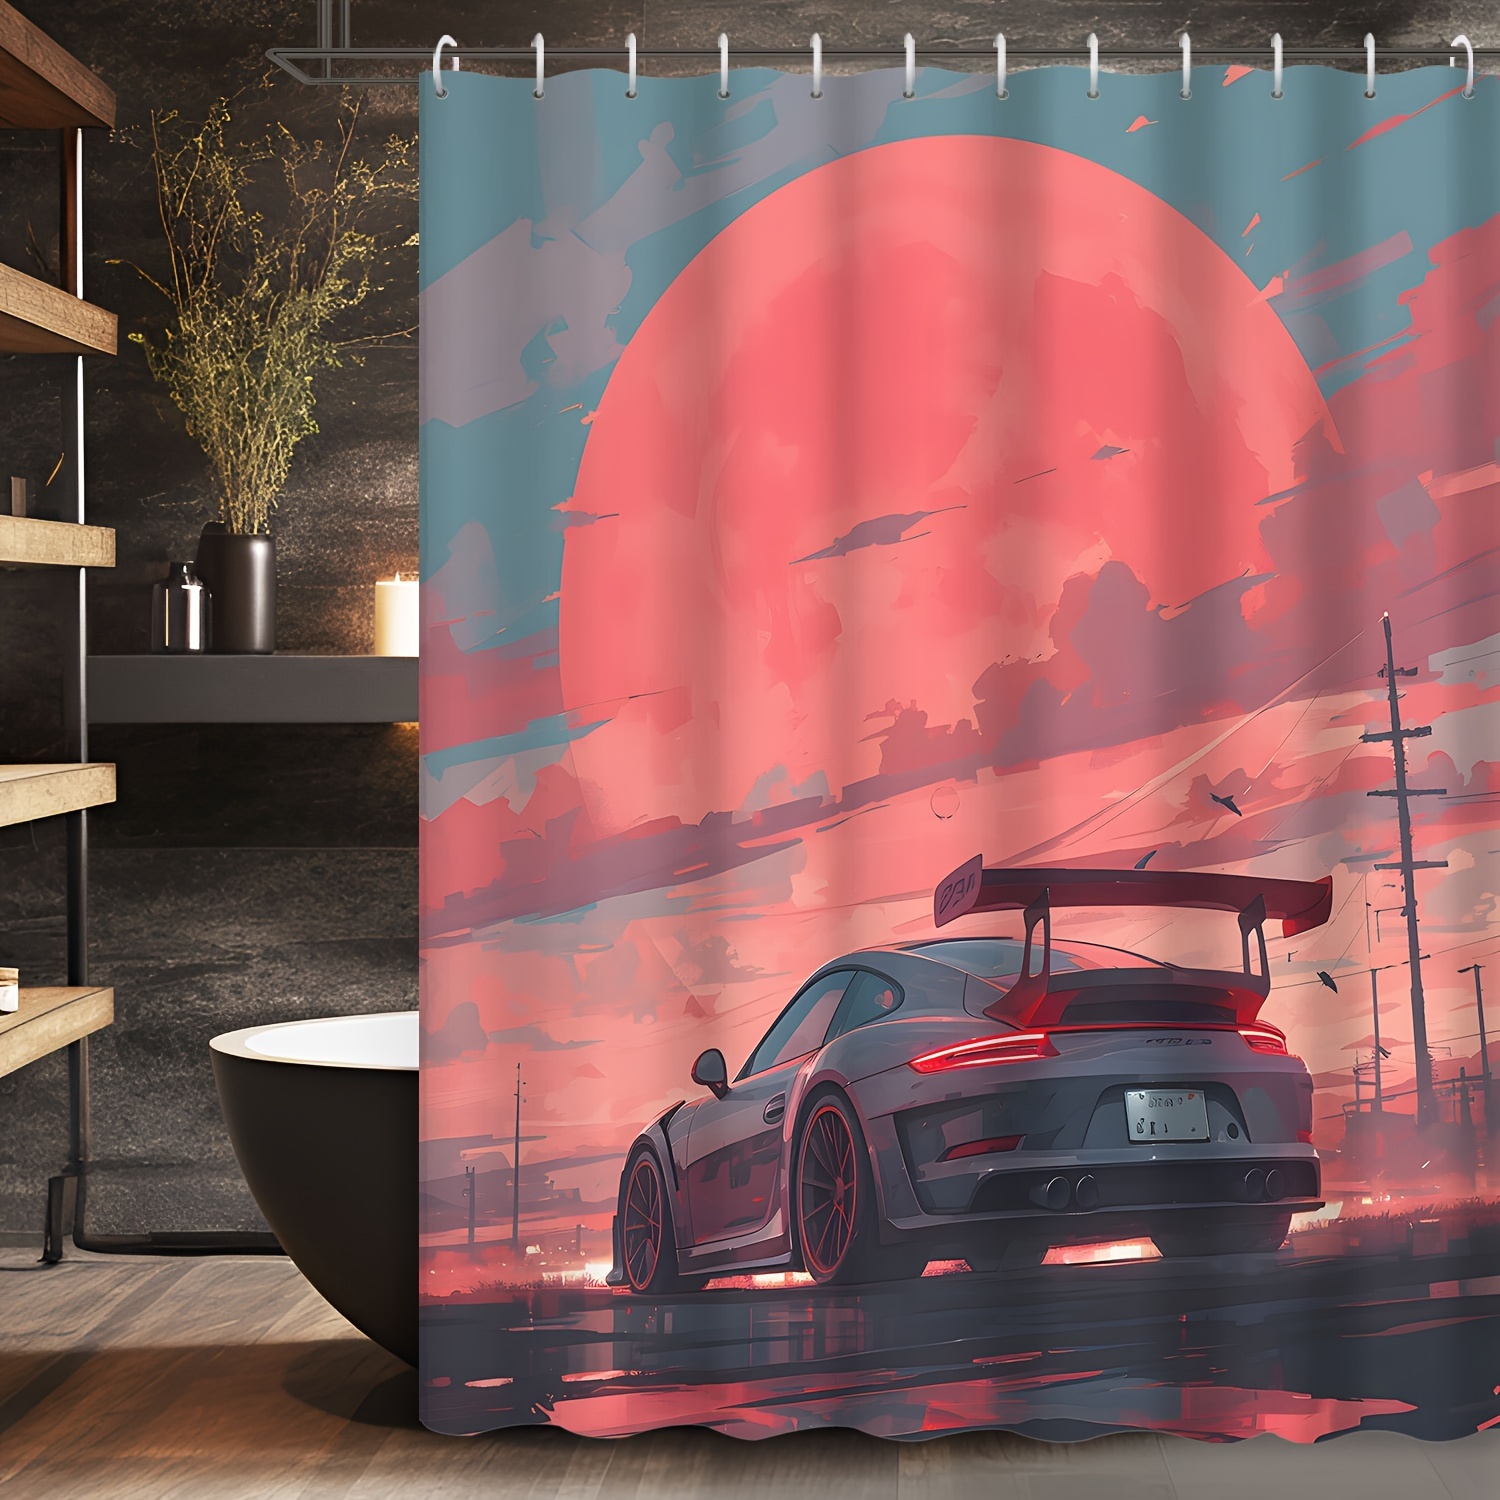 

Sports Car Sunset Print Waterproof Shower Curtain With Hooks, Water-resistant Polyester Fabric Bathroom Decor, Grommet Top, Machine Washable, Vehicle-themed Unlined Bath Curtain, 72x72 Inches